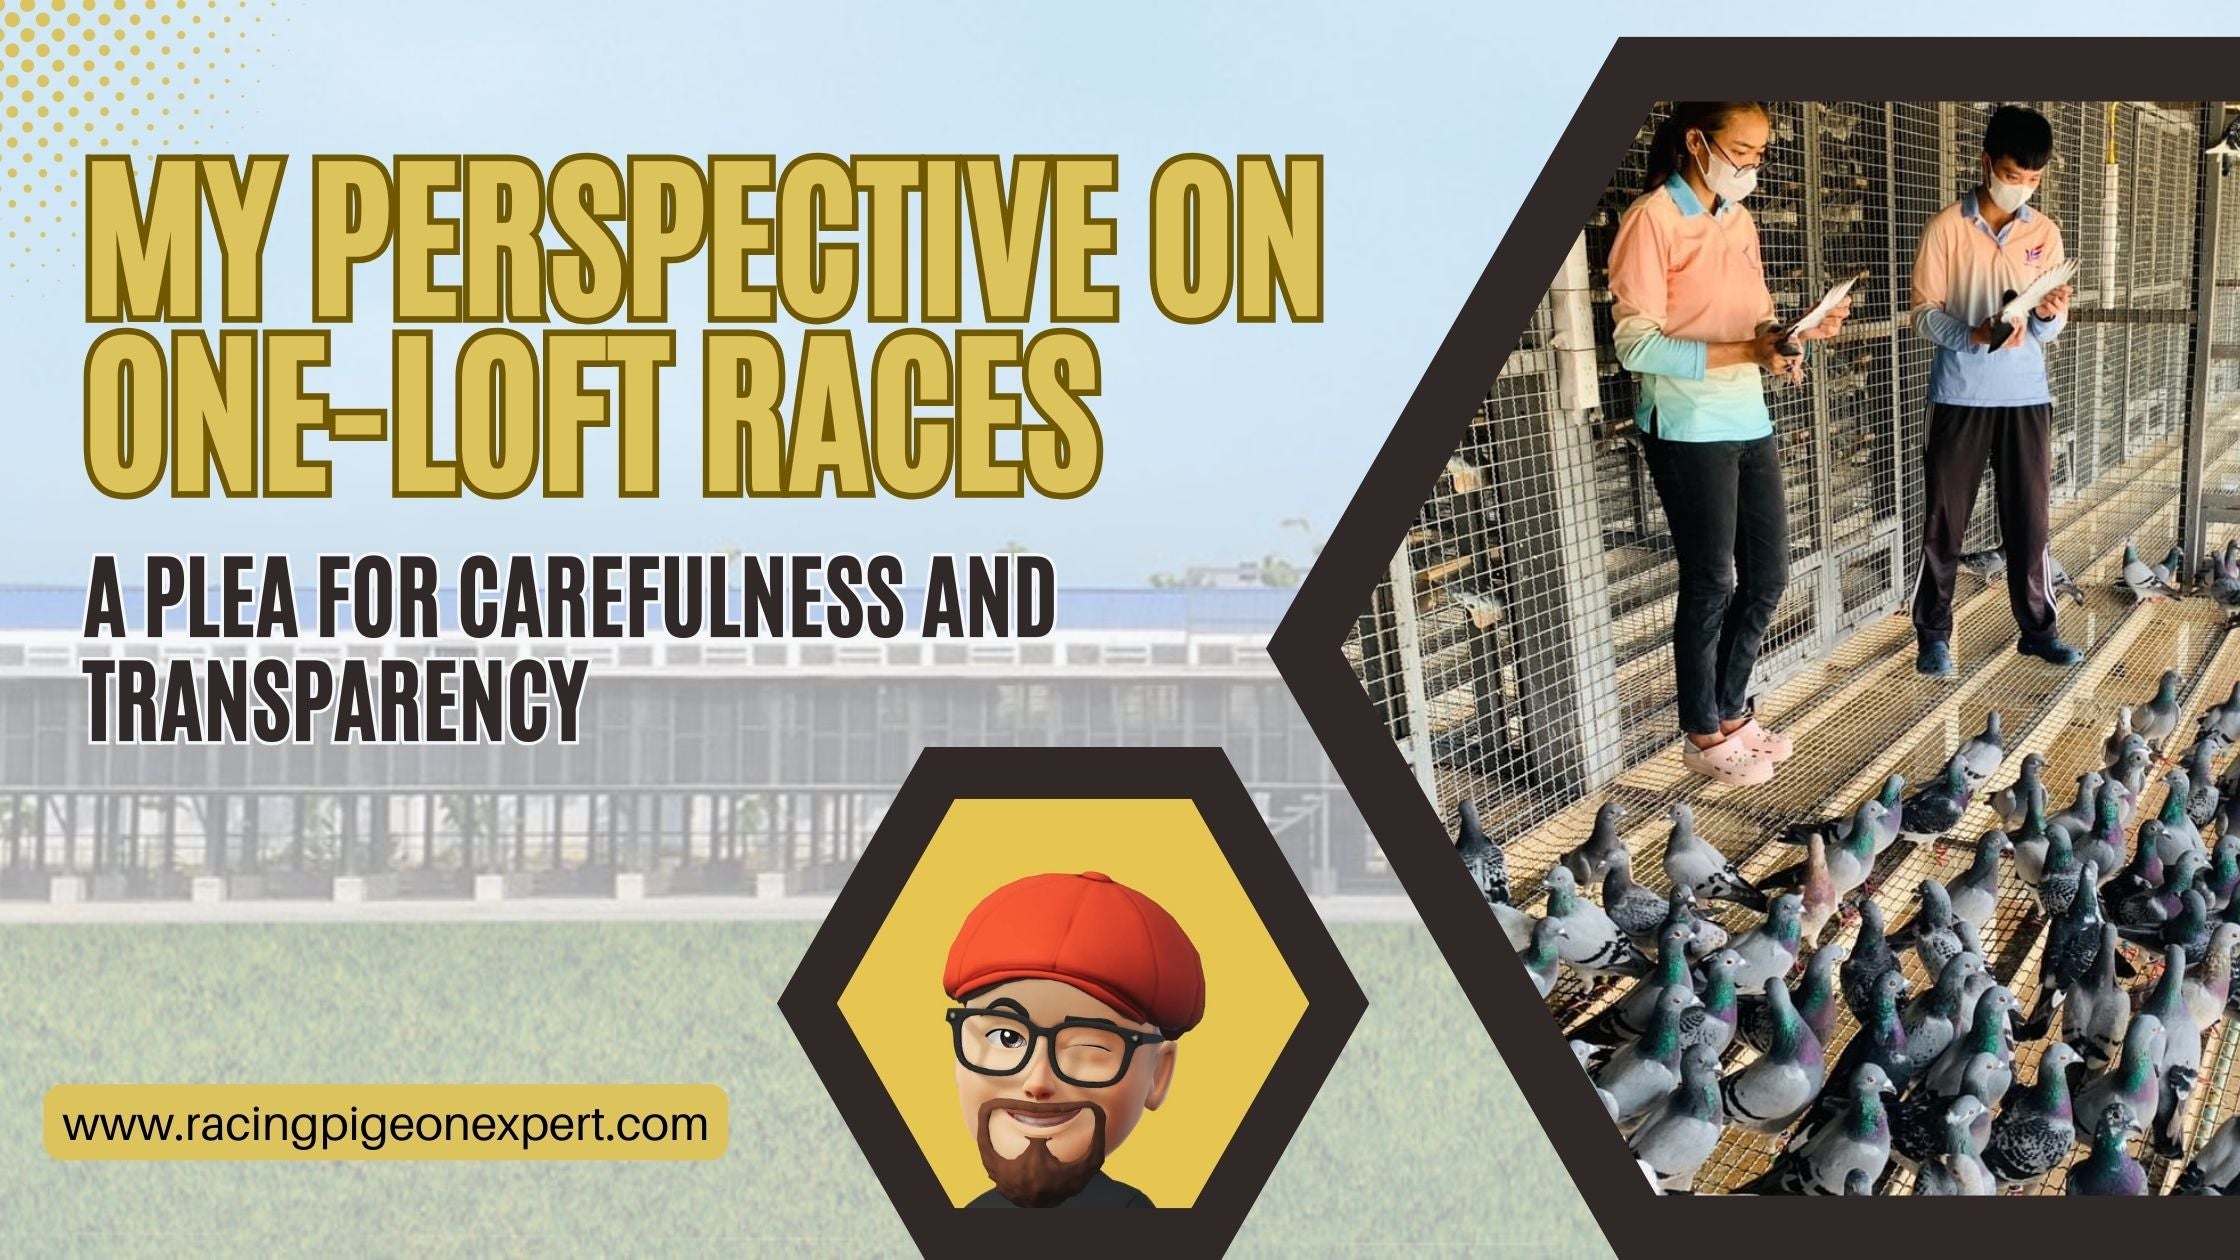 My Perspective on One-Loft Races: A Plea for Carefulness and Transparency